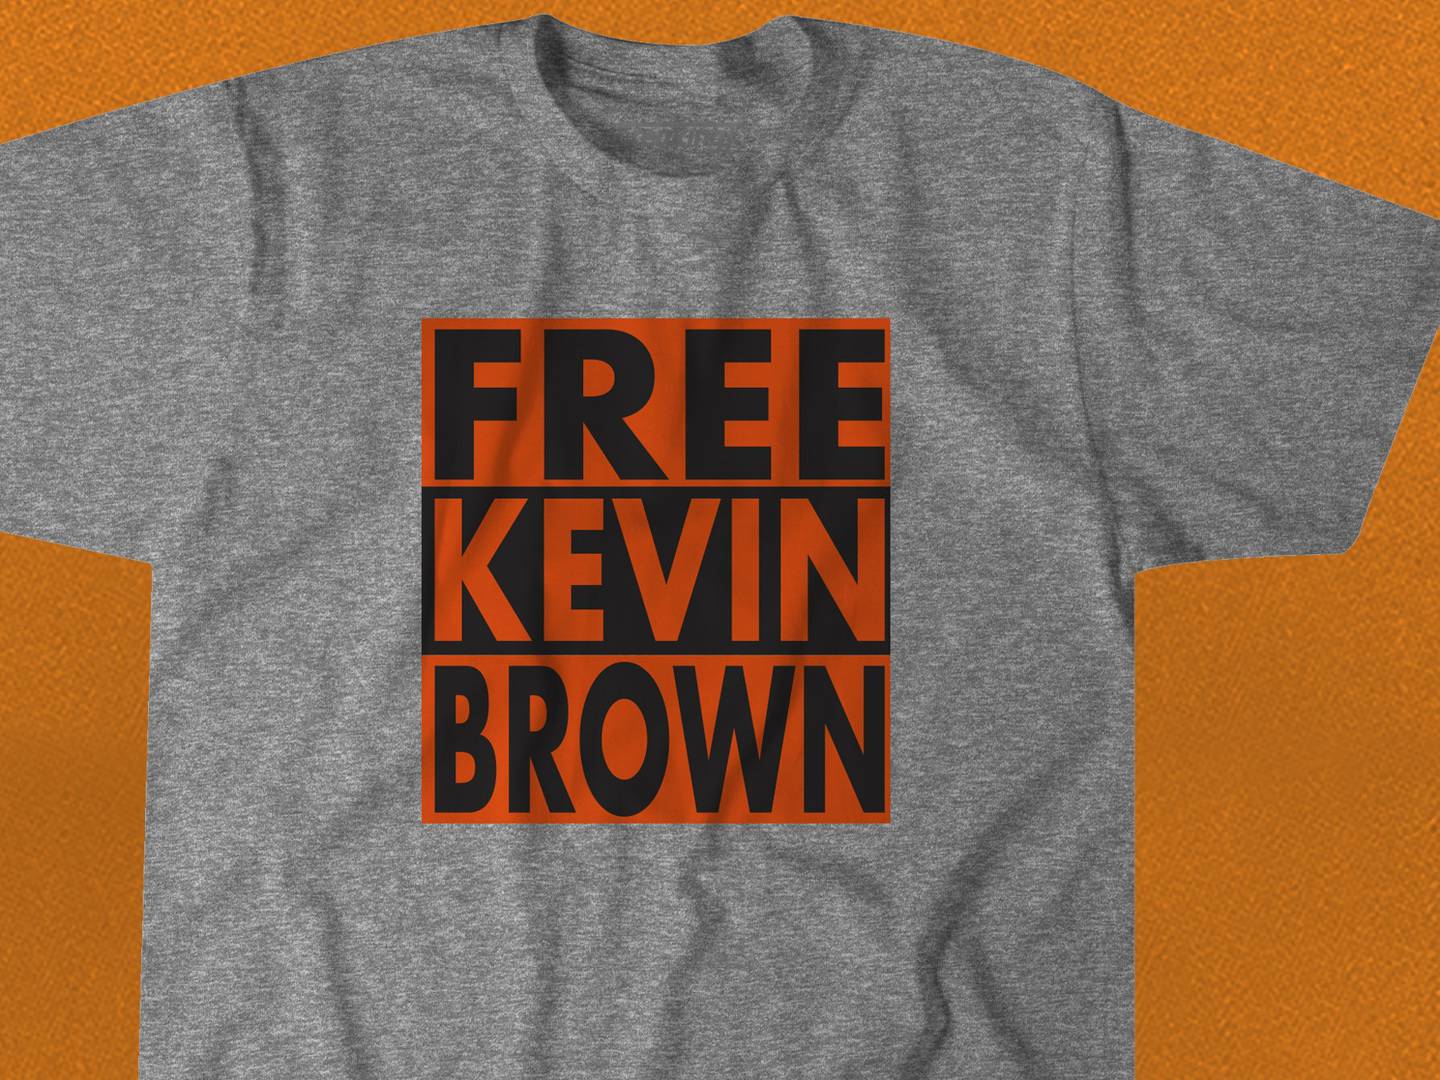 This image shows a t-shirt that says "FREE KEVIN BROWN."